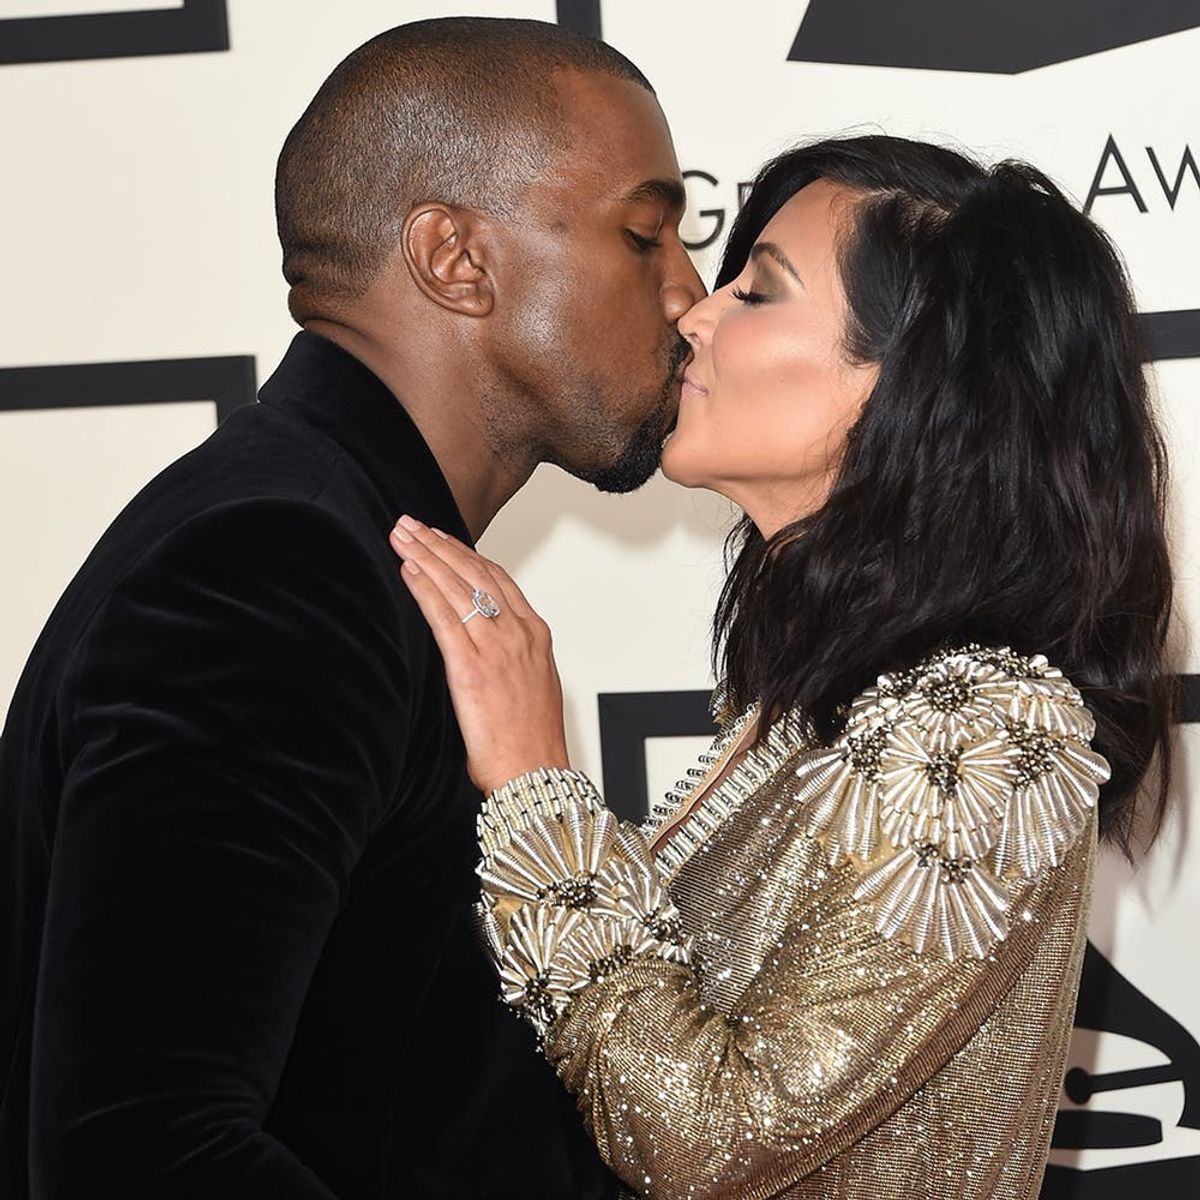 How Kim and Kanye Are Spending Their One Year Anniversary